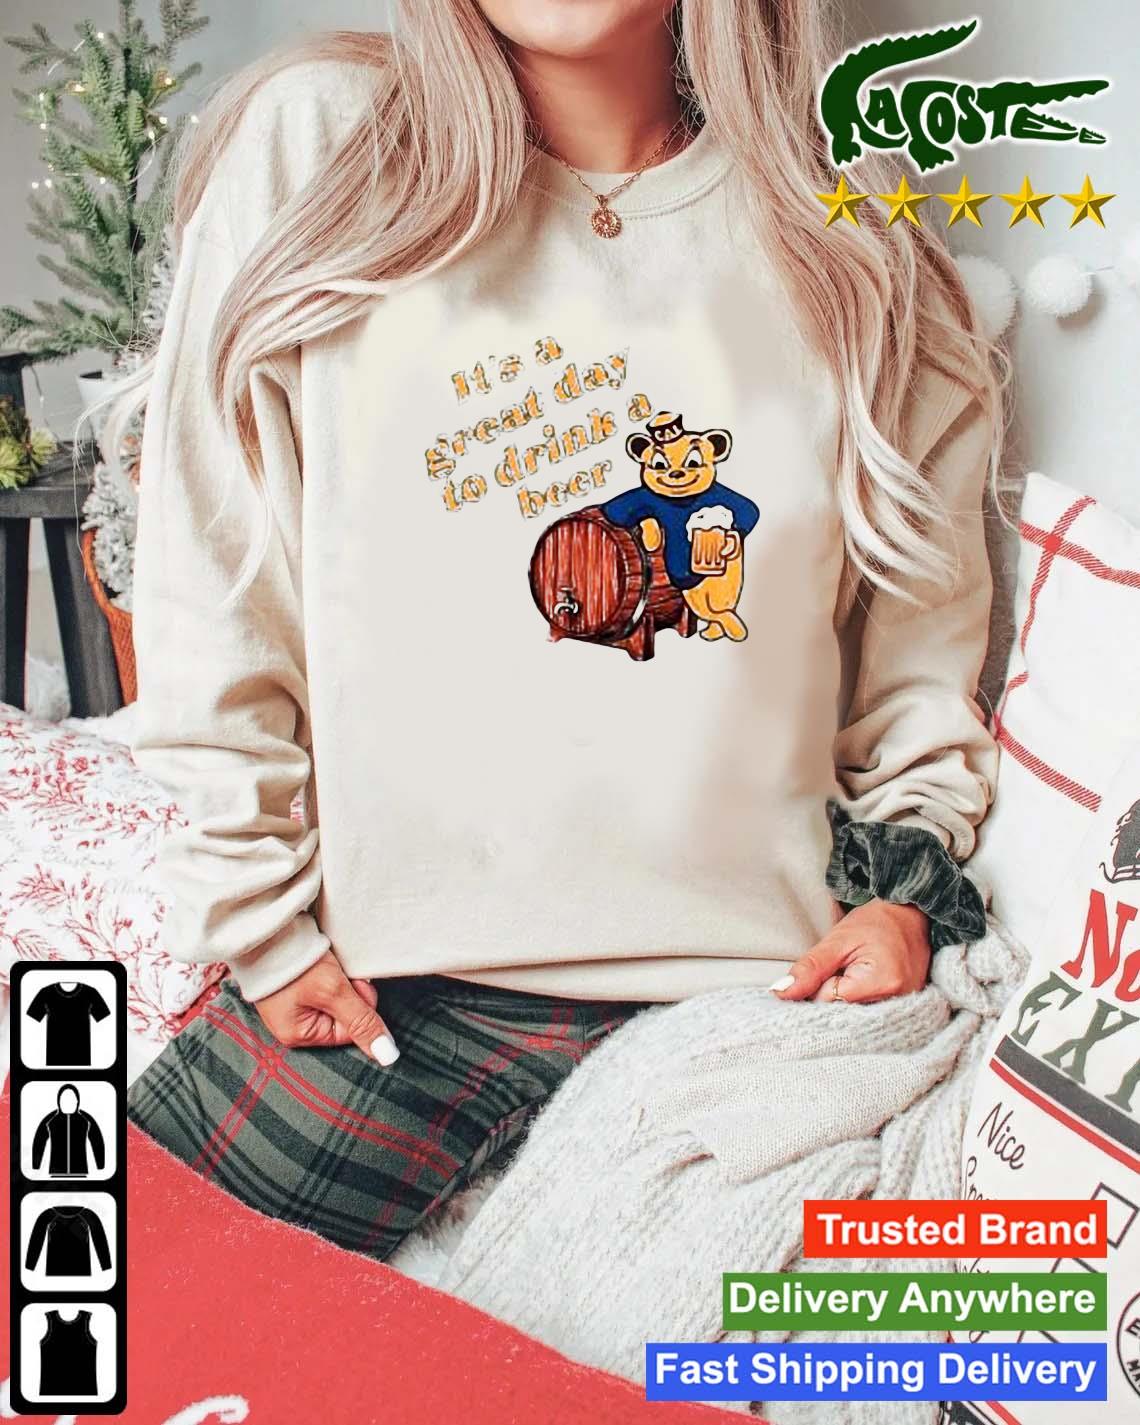 Dalmcm It’s A Great Day To Drink A Beer Sweats Mockup Sweater